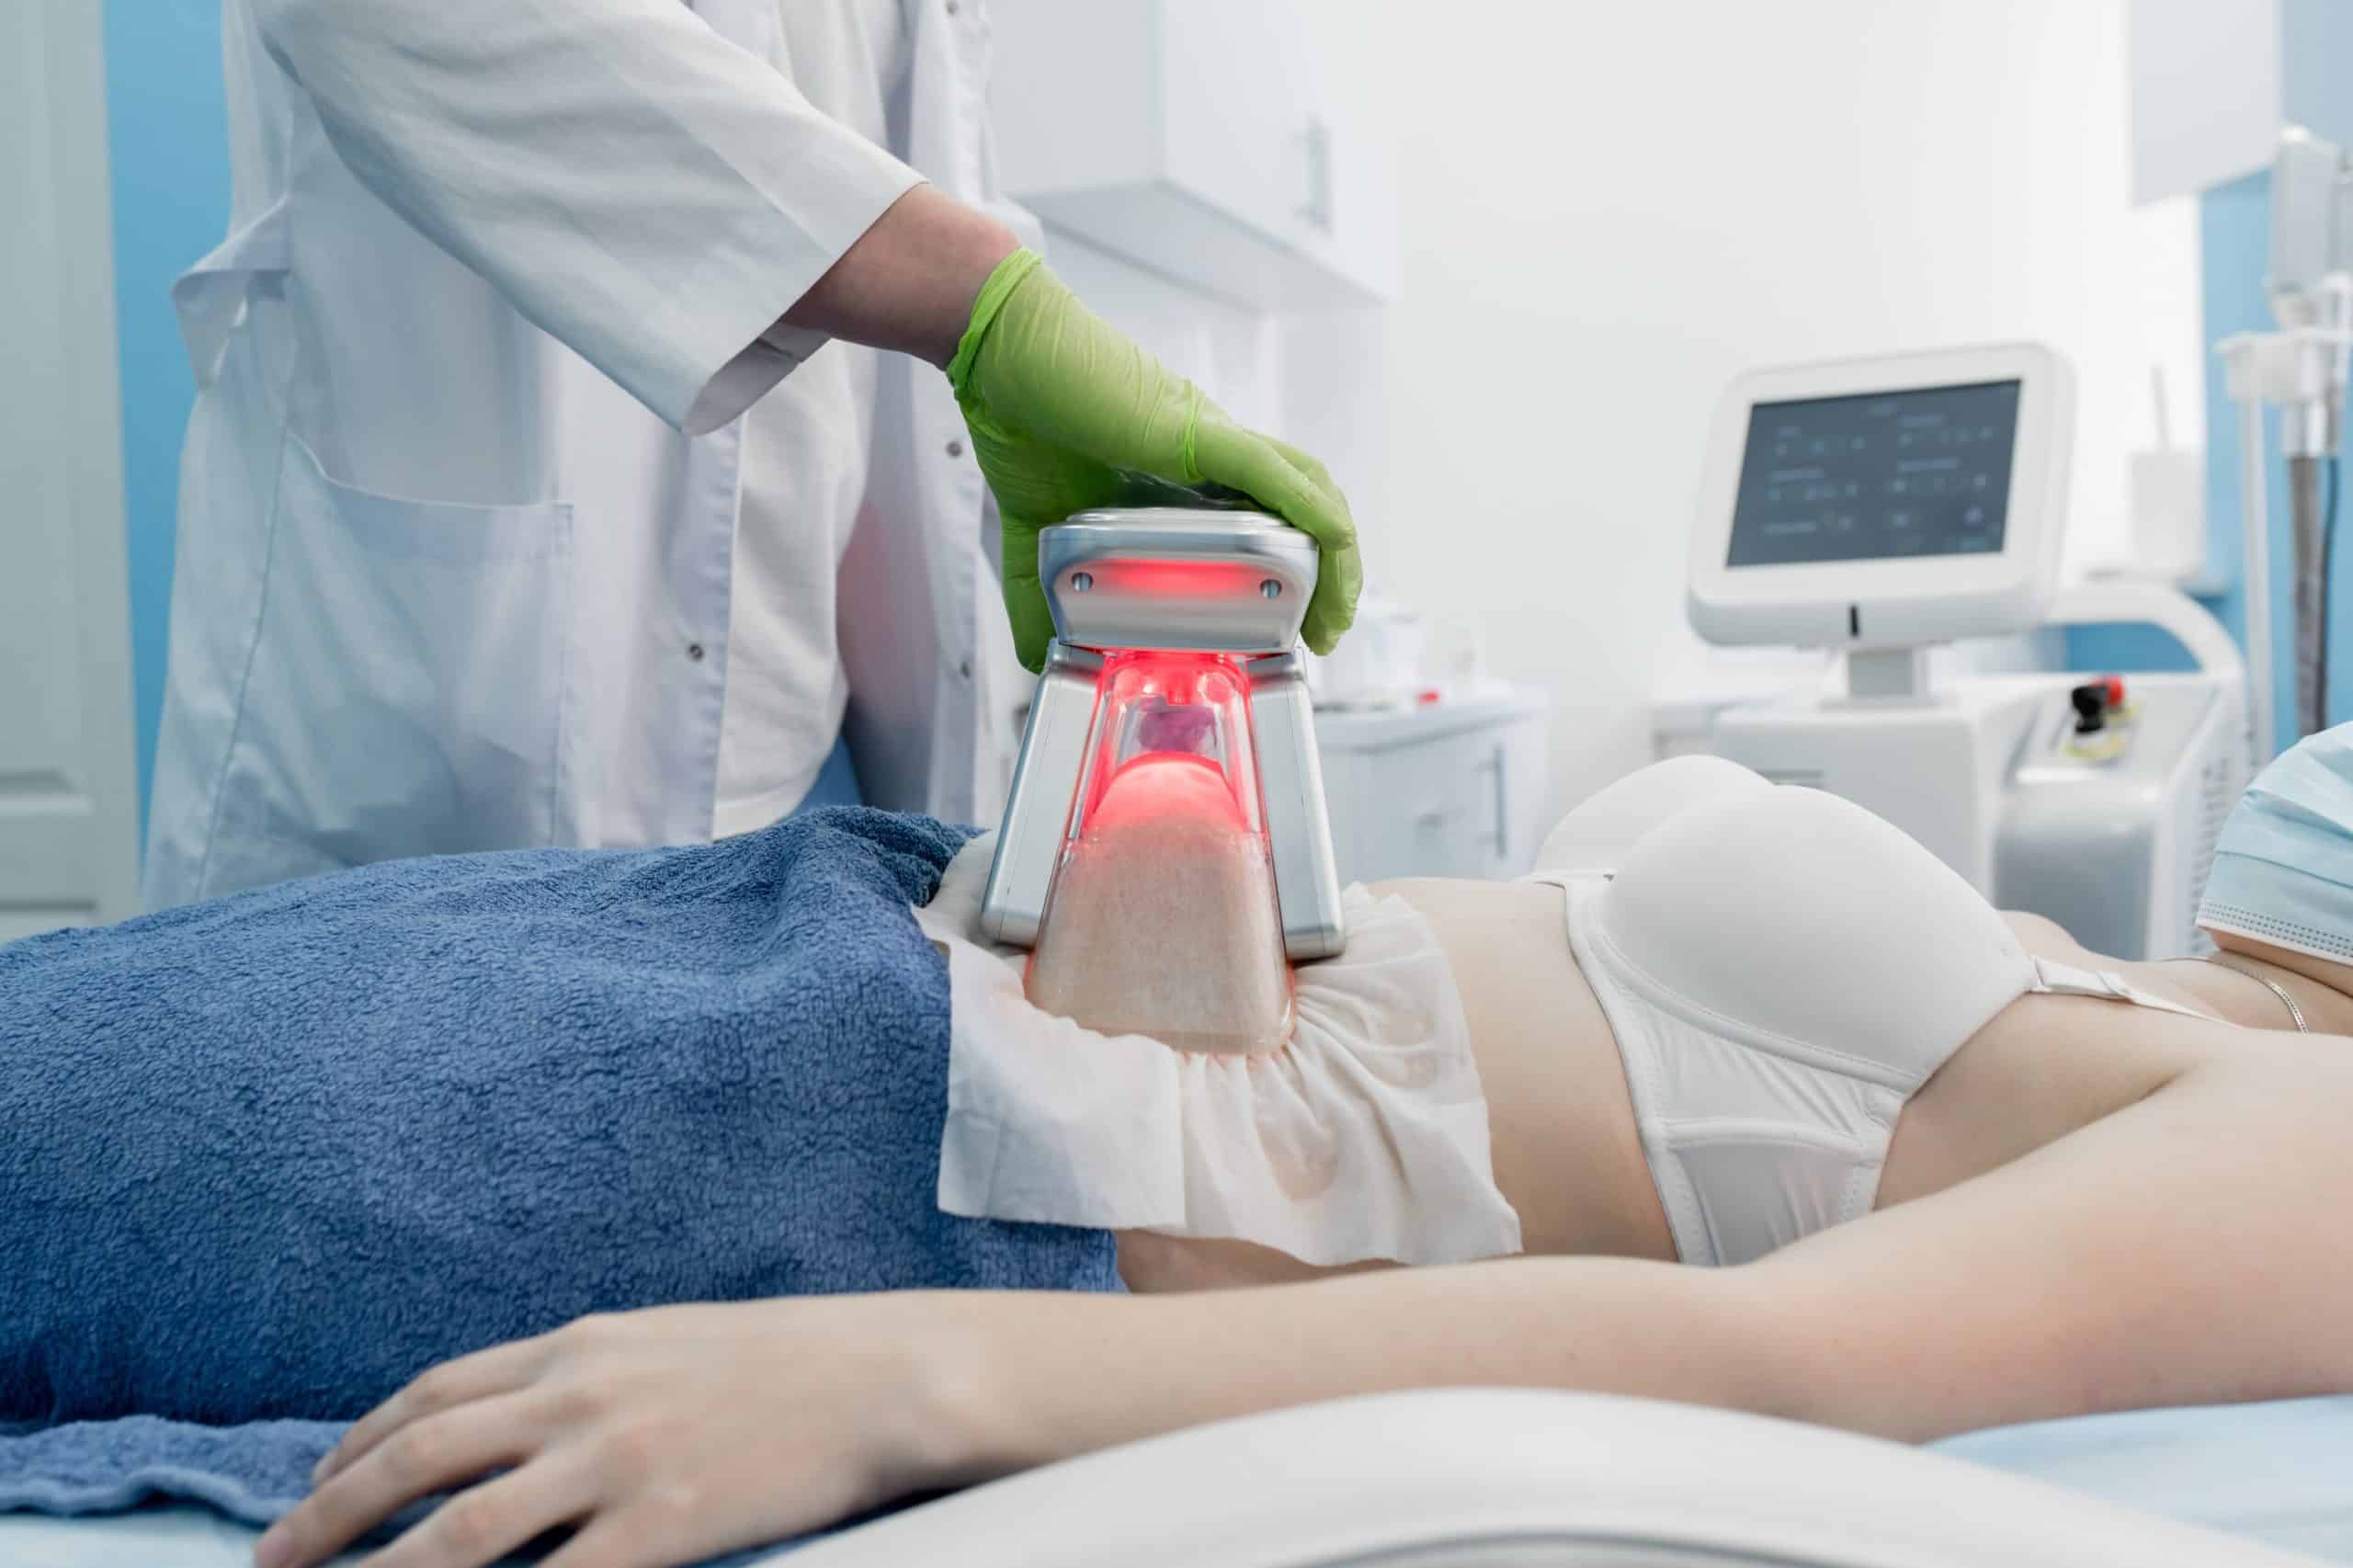 Benefits of SculpSure. Hardware anticellulite massage rf lifting procedure ultrasound cavitation body contouring to Young women | Adam J Cohen, MD in Glenview & Chicago, IL